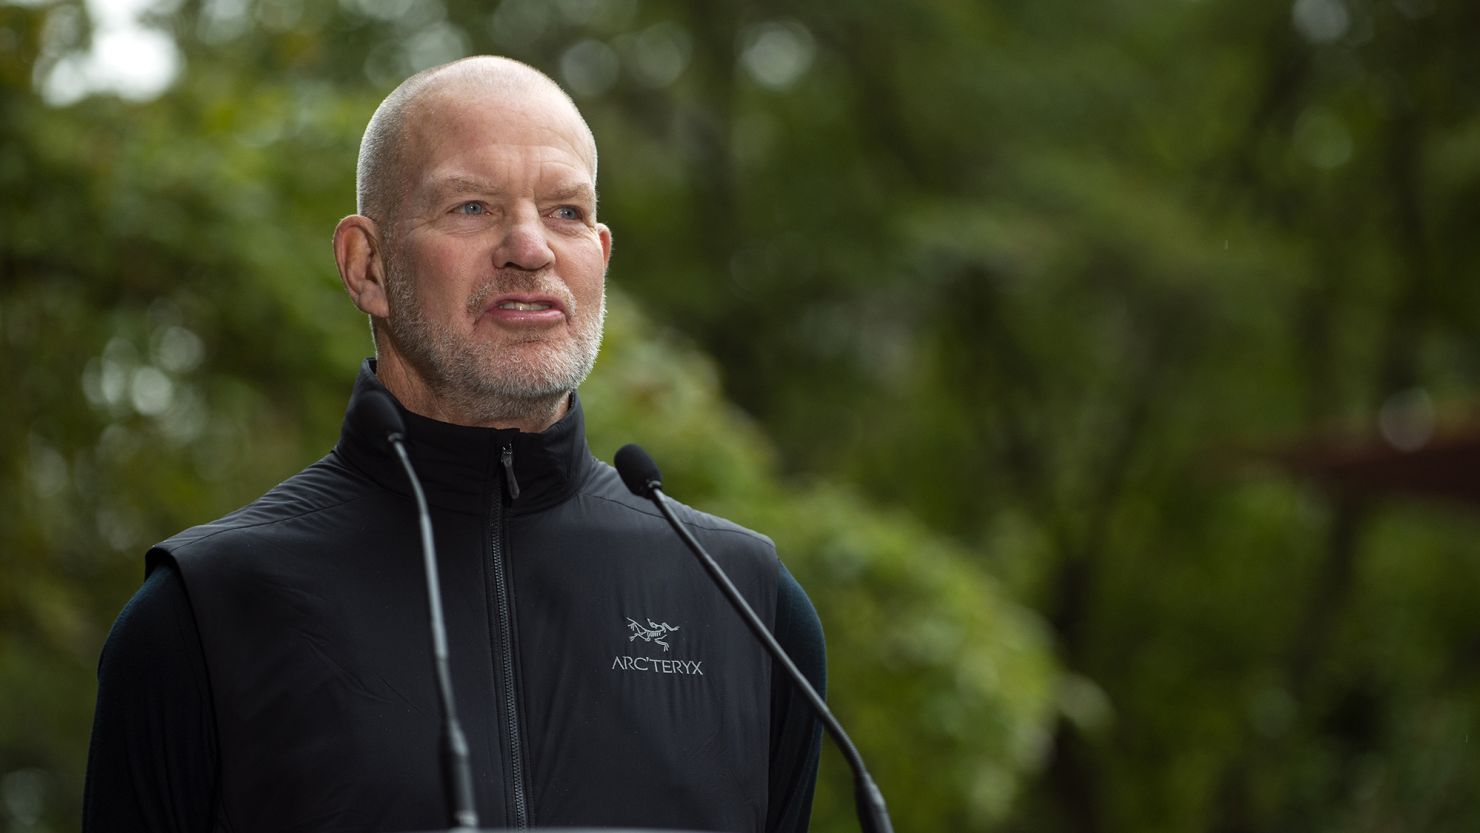 Chip Wilson, founder of Lululemon Athletica Inc., speaks during a news conference in Vancouver, British Columbia, Canada, on Thursday, Sept. 15, 2022.